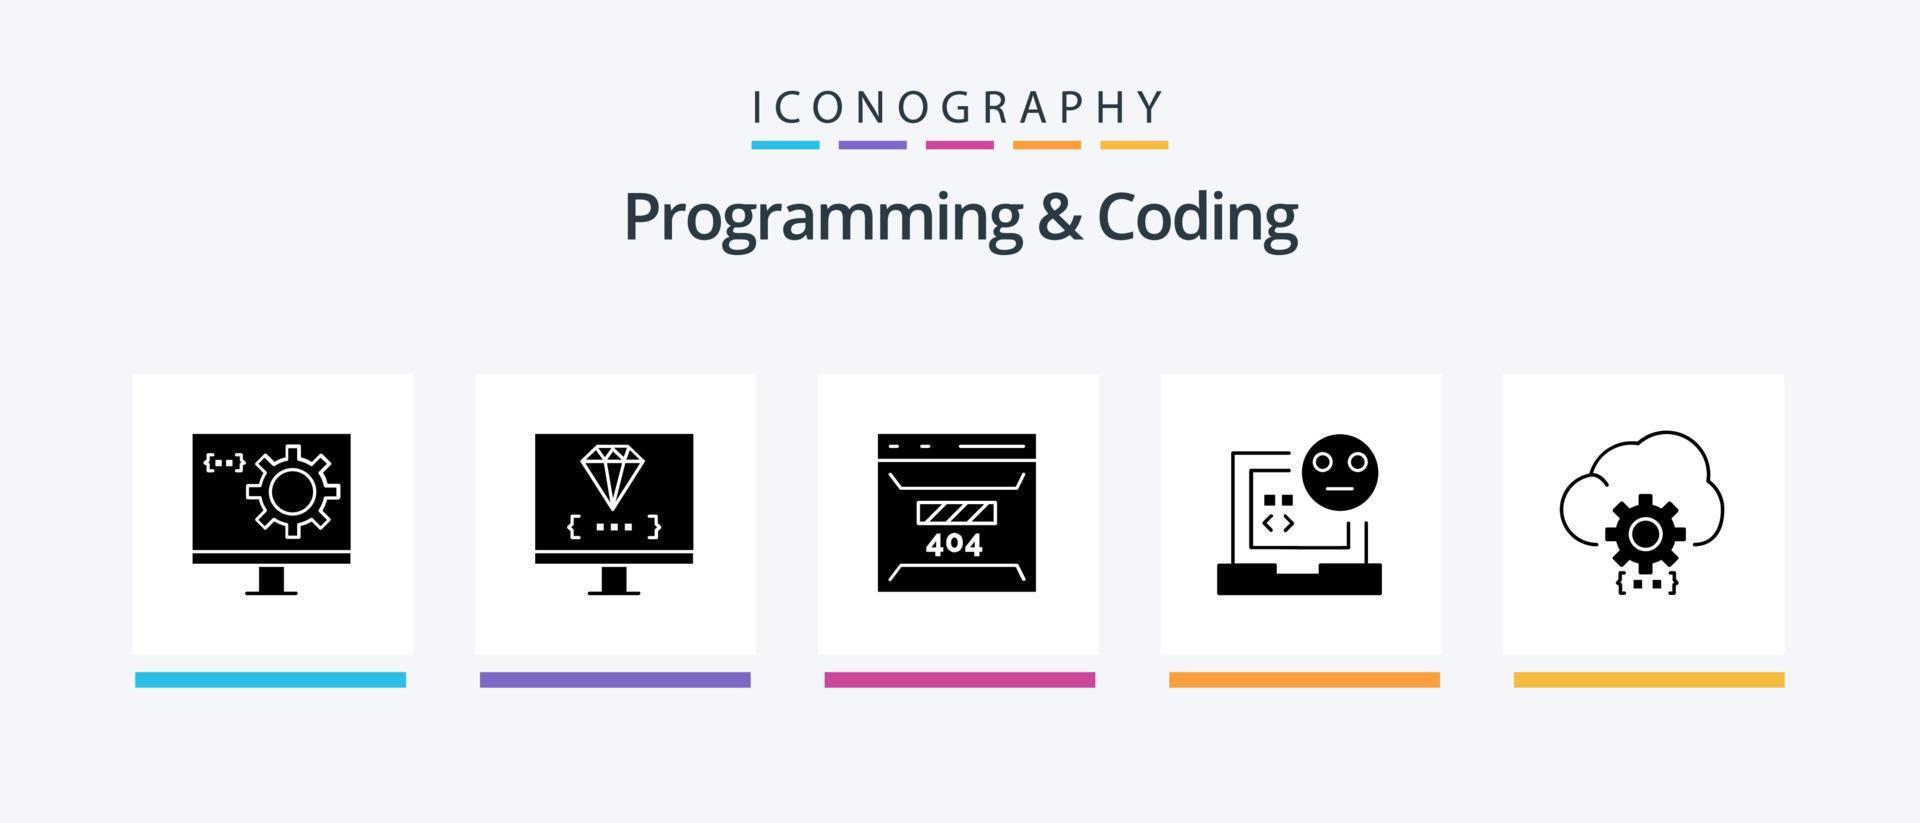 Programming And Coding Glyph 5 Icon Pack Including develop. cloud. page. error. develop. Creative Icons Design vector